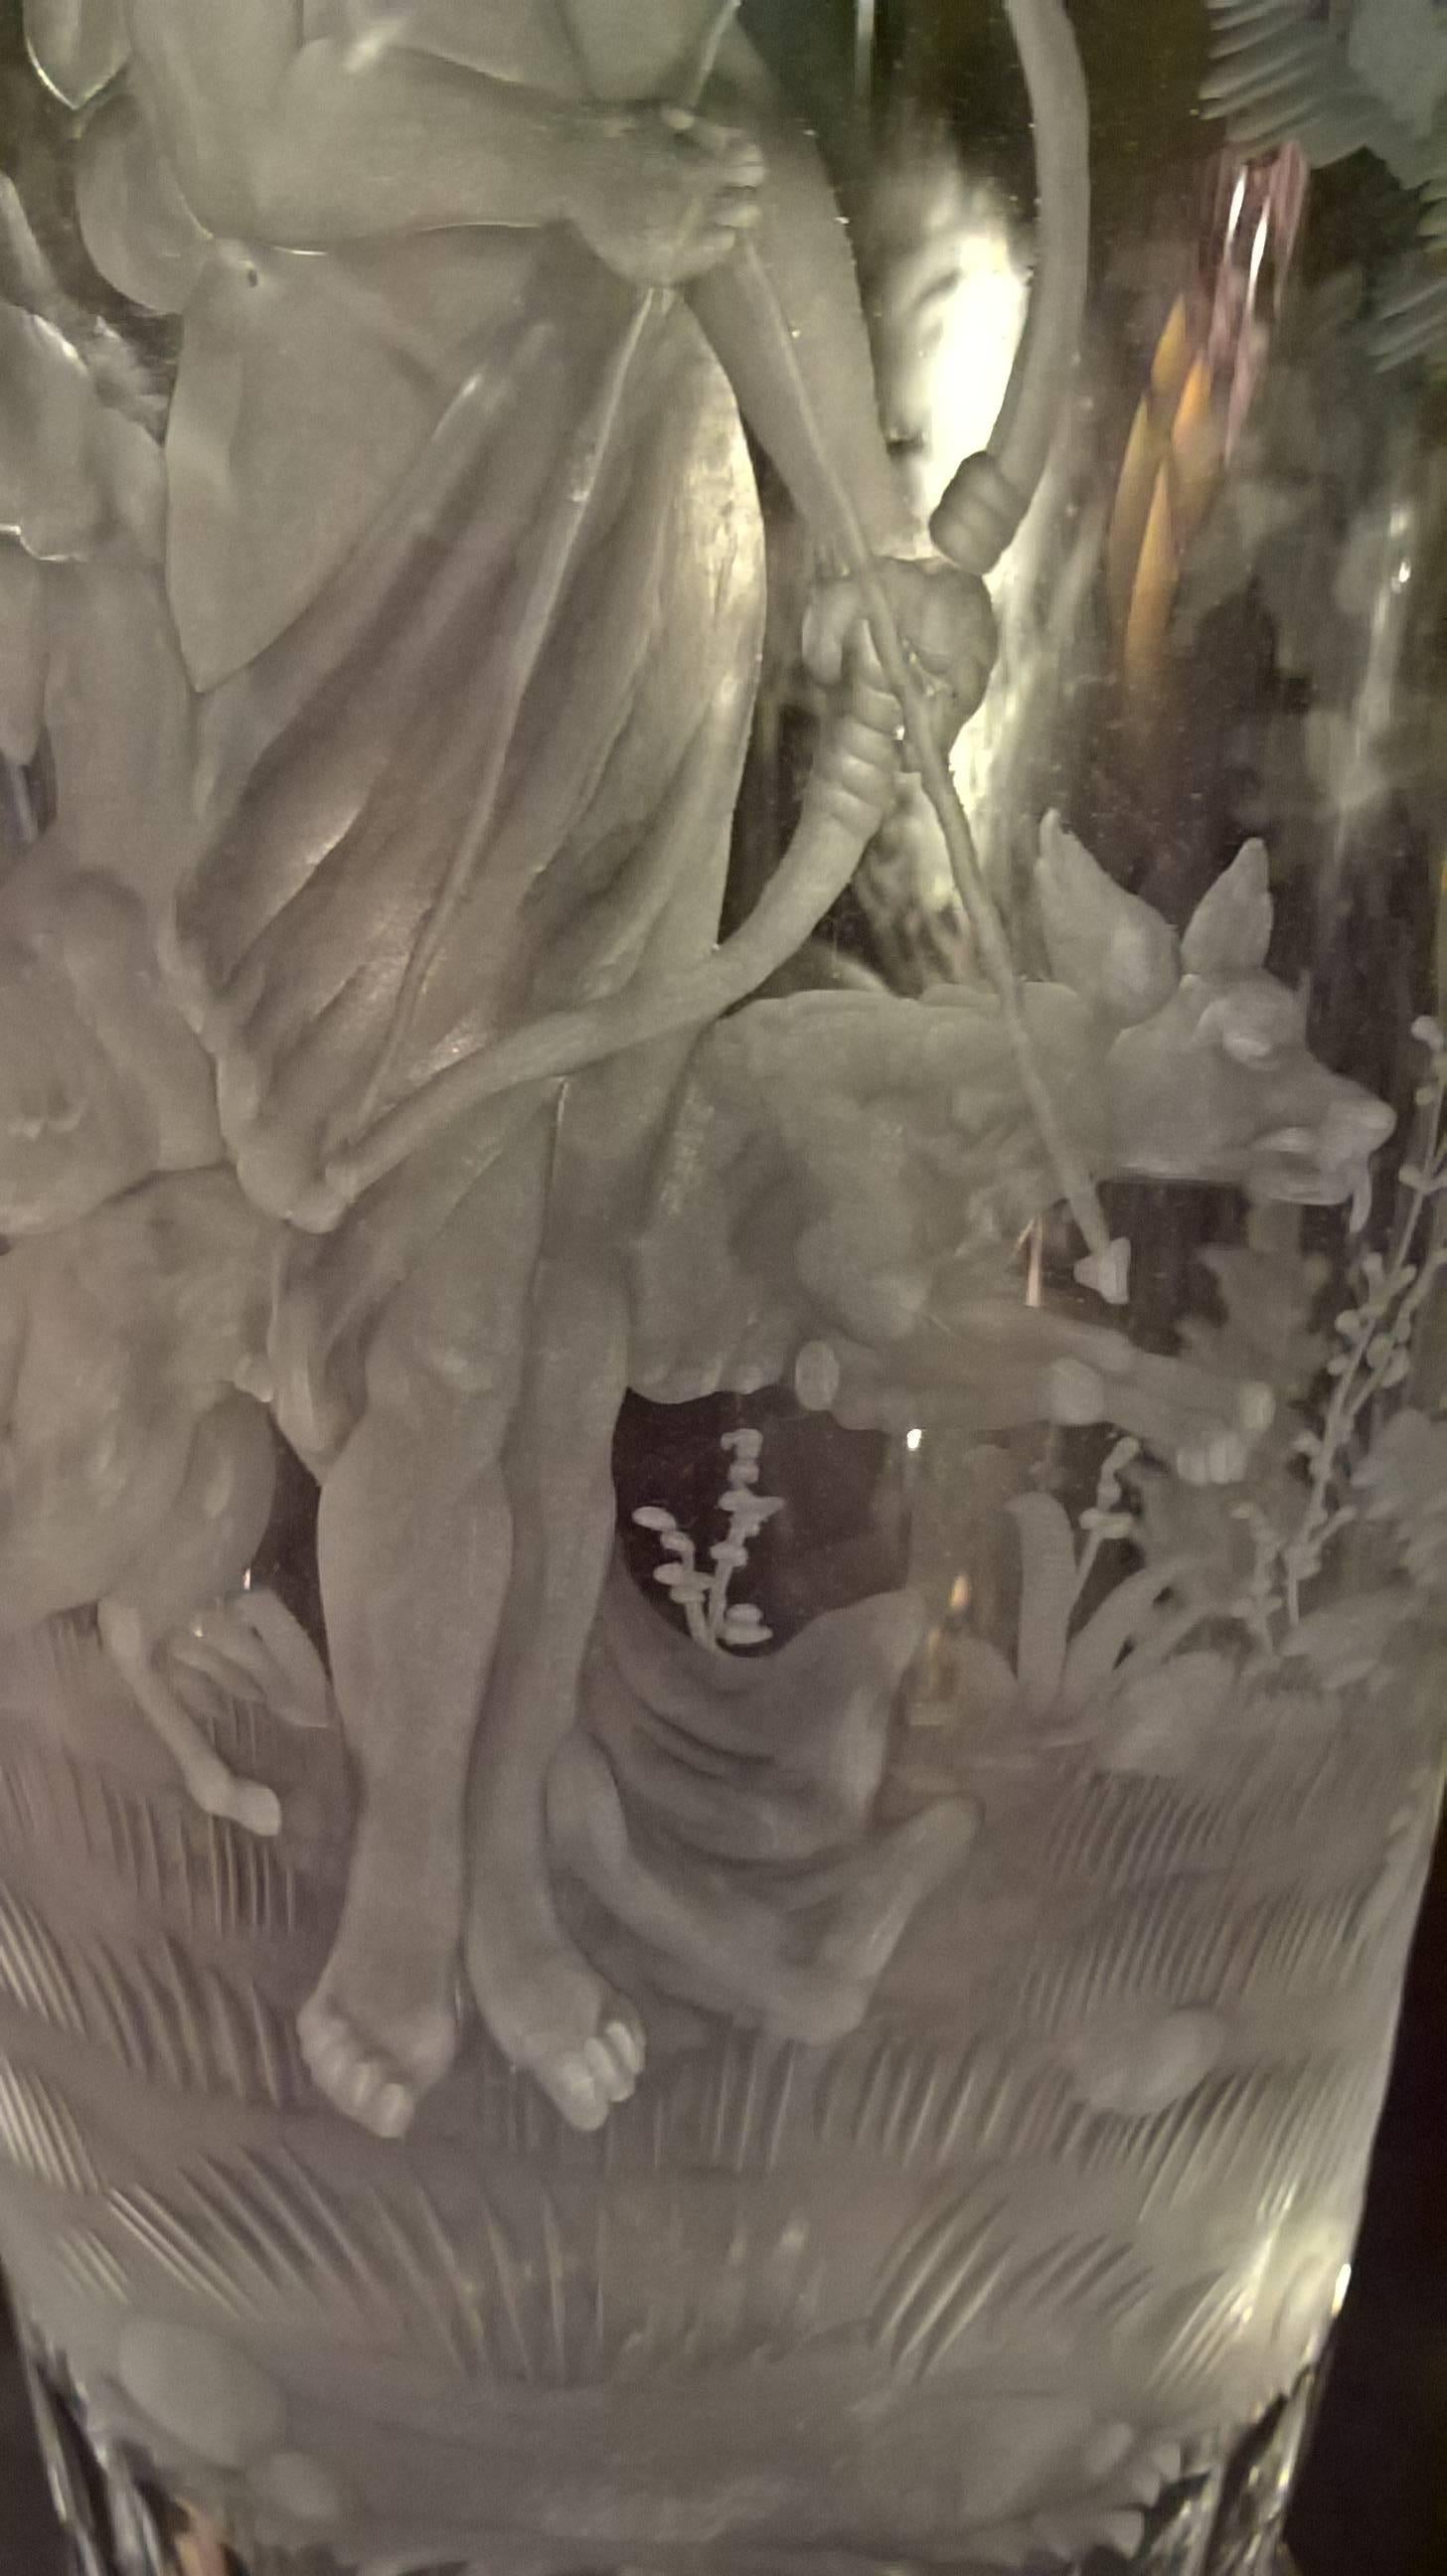 20th Century Moser Art Deco Glass Pitcher Hand-Engraved with Diana and Wolfs in Clear Crystal